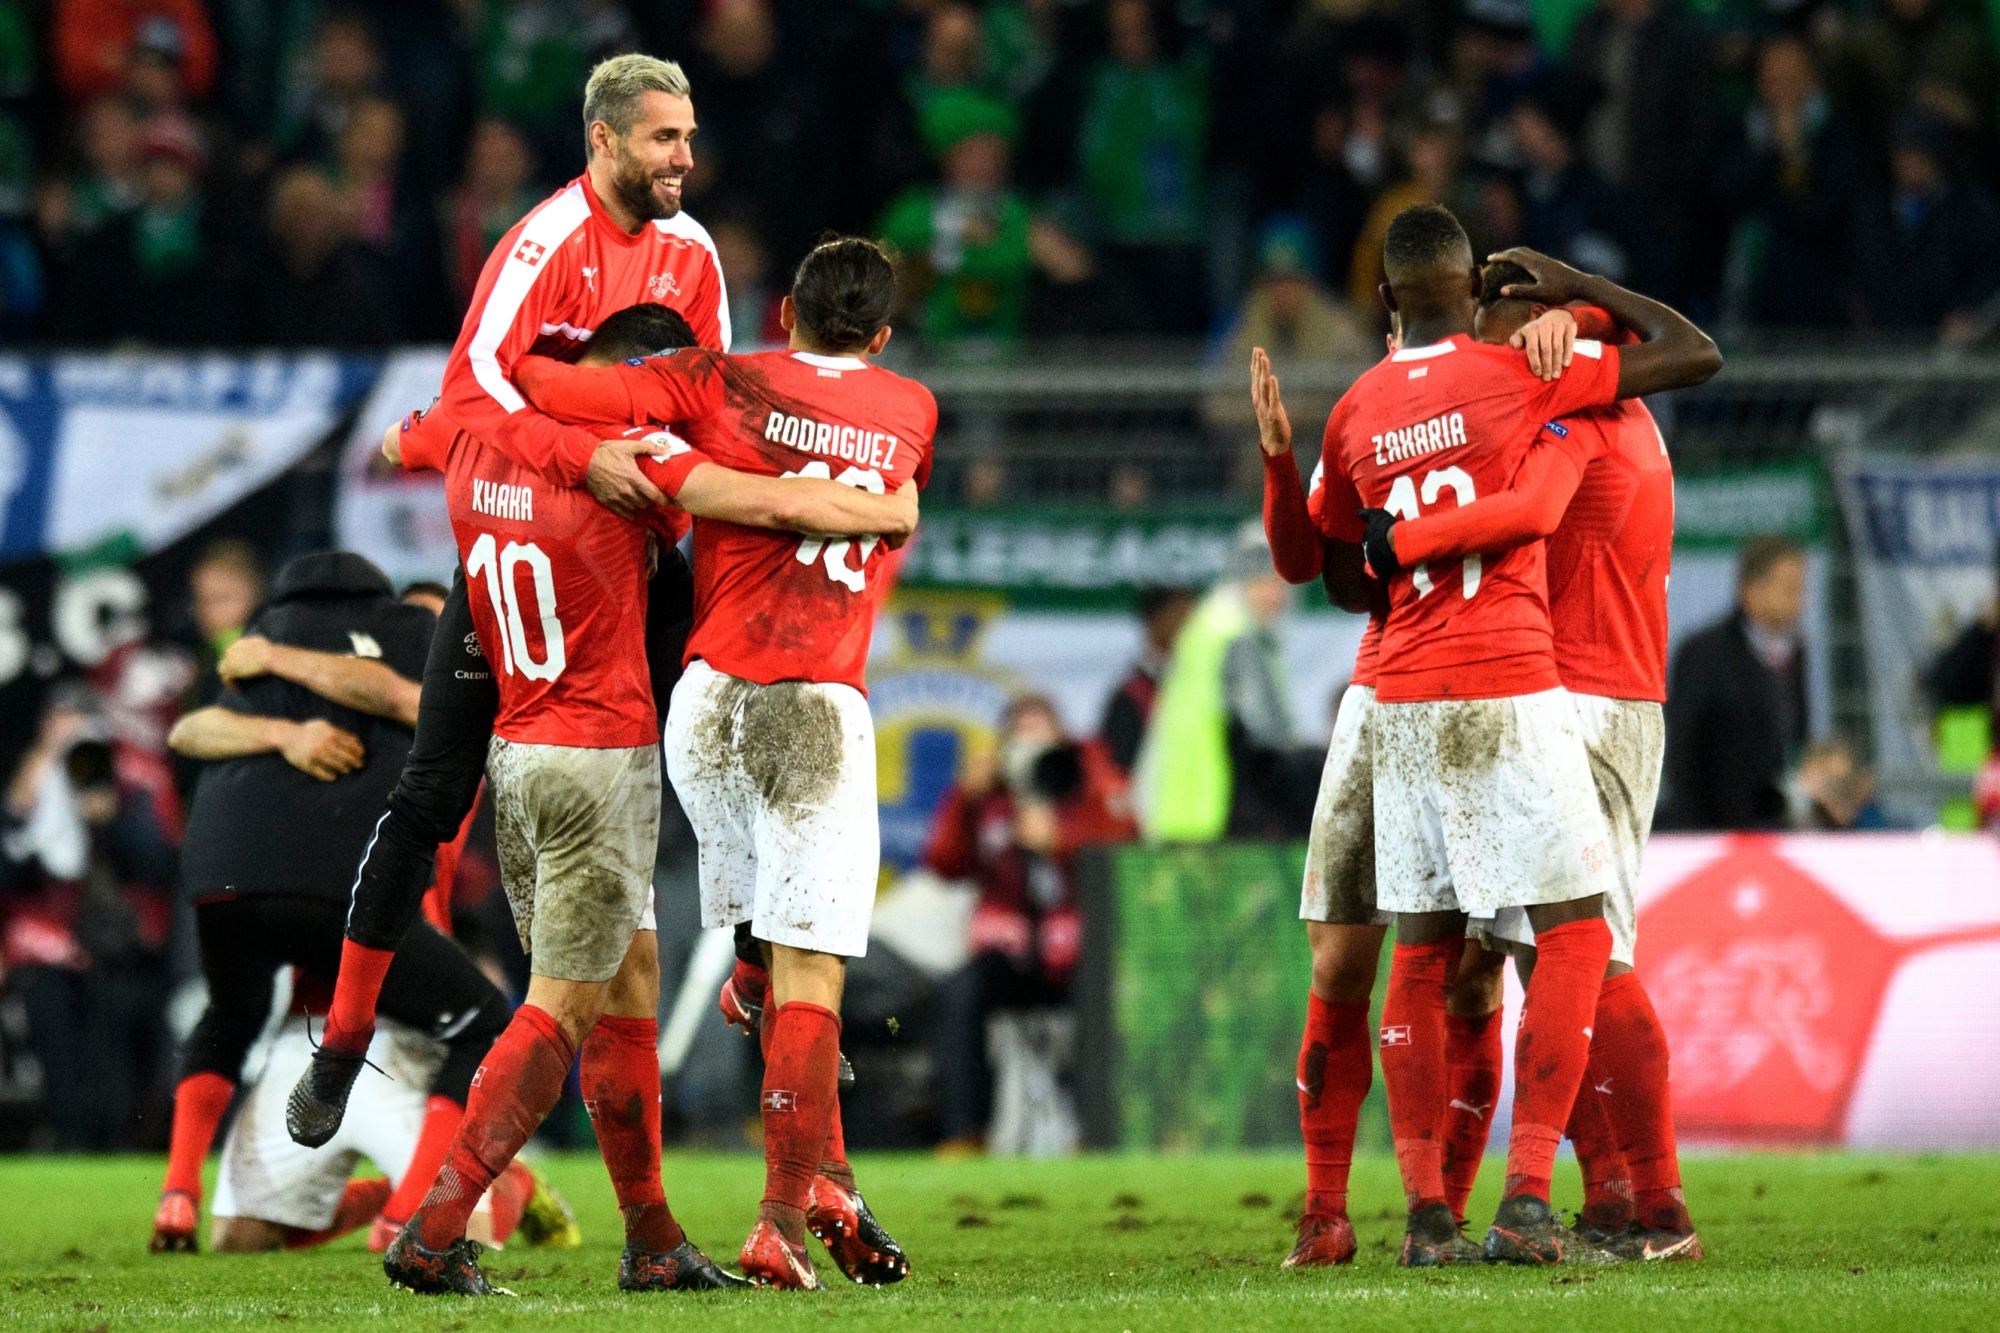 Switzerland's national team soccer players celebrate their qualifying for the 2018 FIFA World Cup Russia after beating Northern Ireland, during the 2018 Fifa World Cup play-offs second leg soccer match Switzerland against Northern Ireland at the St. Jakob-Park stadium in Basel, Switzerland, Sunday, November 12, 2017. (KEYSTONE/Laurent Gillieron) SOCCER WORLD CUP QUALIFICATION SWITZERLAND NORTHERN IRELAND